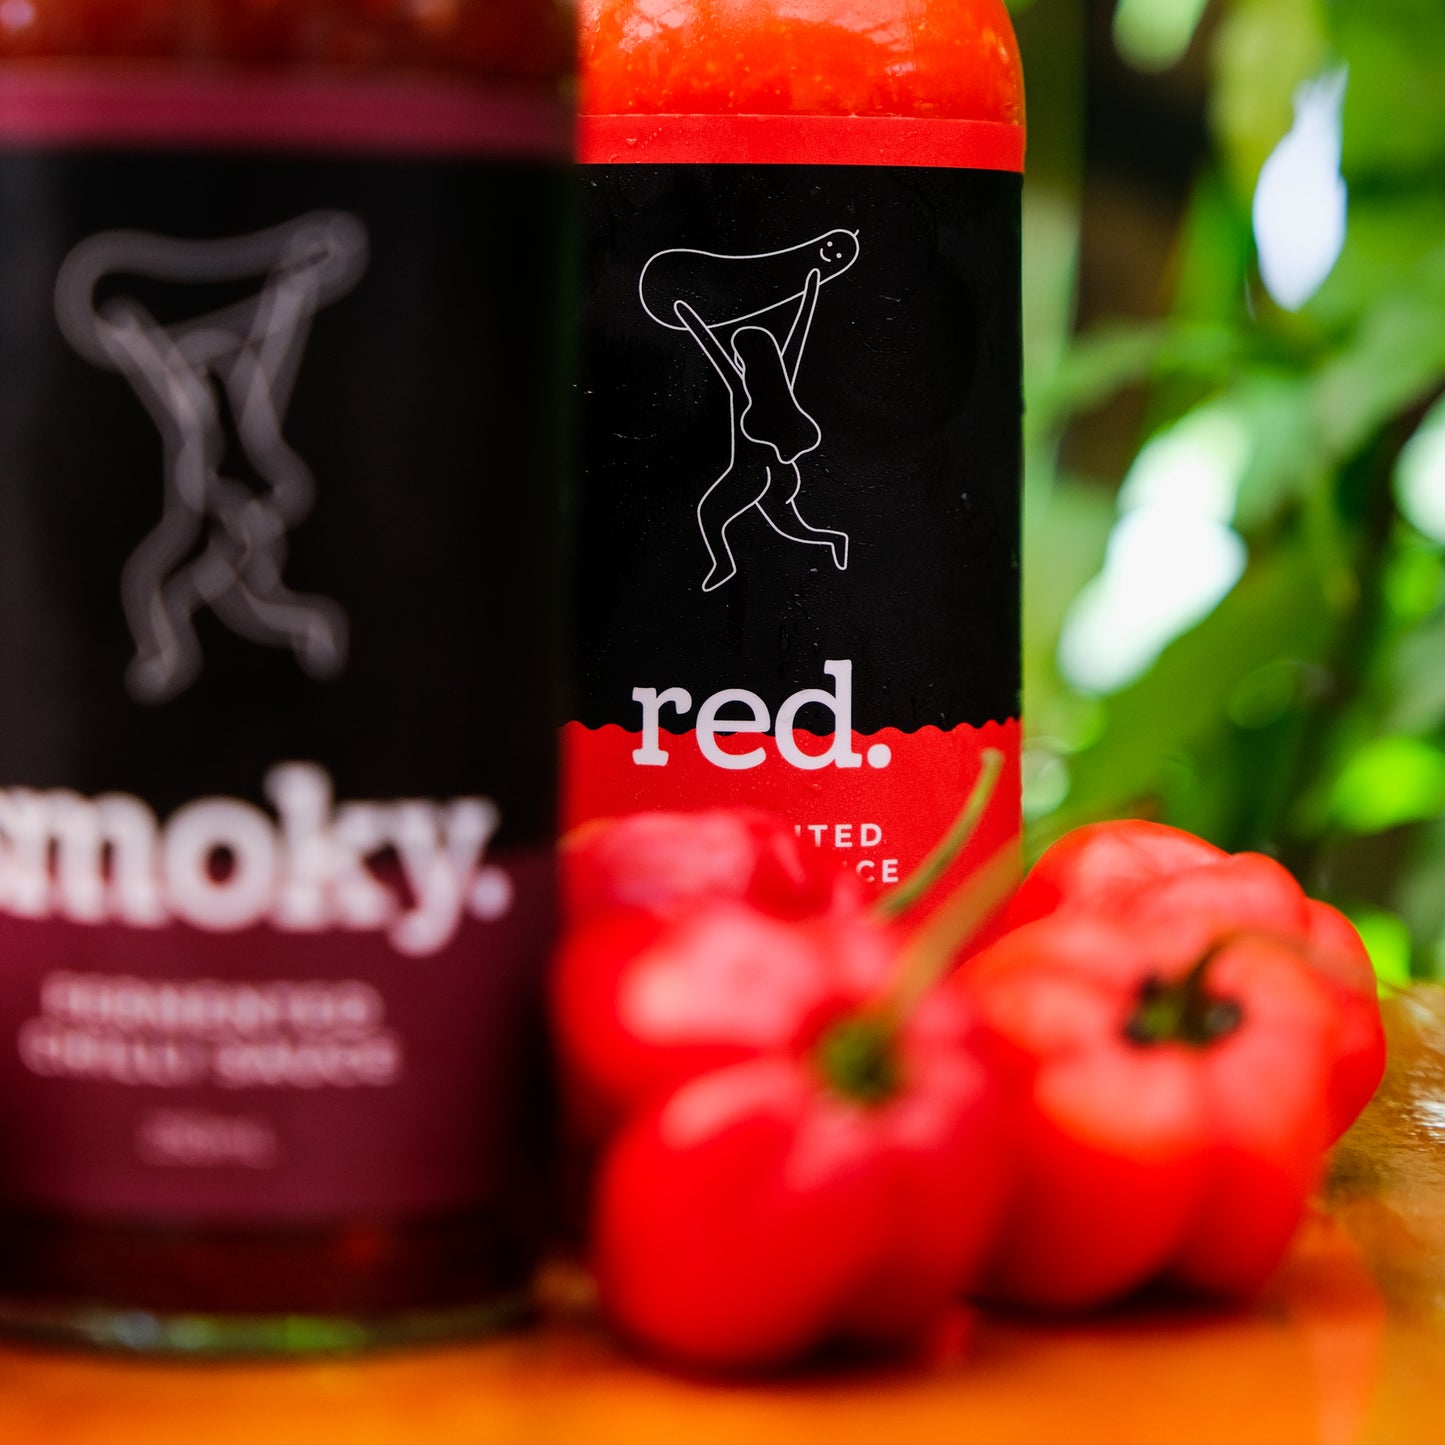 "Red" Fermented Chilli Sauce 250ml